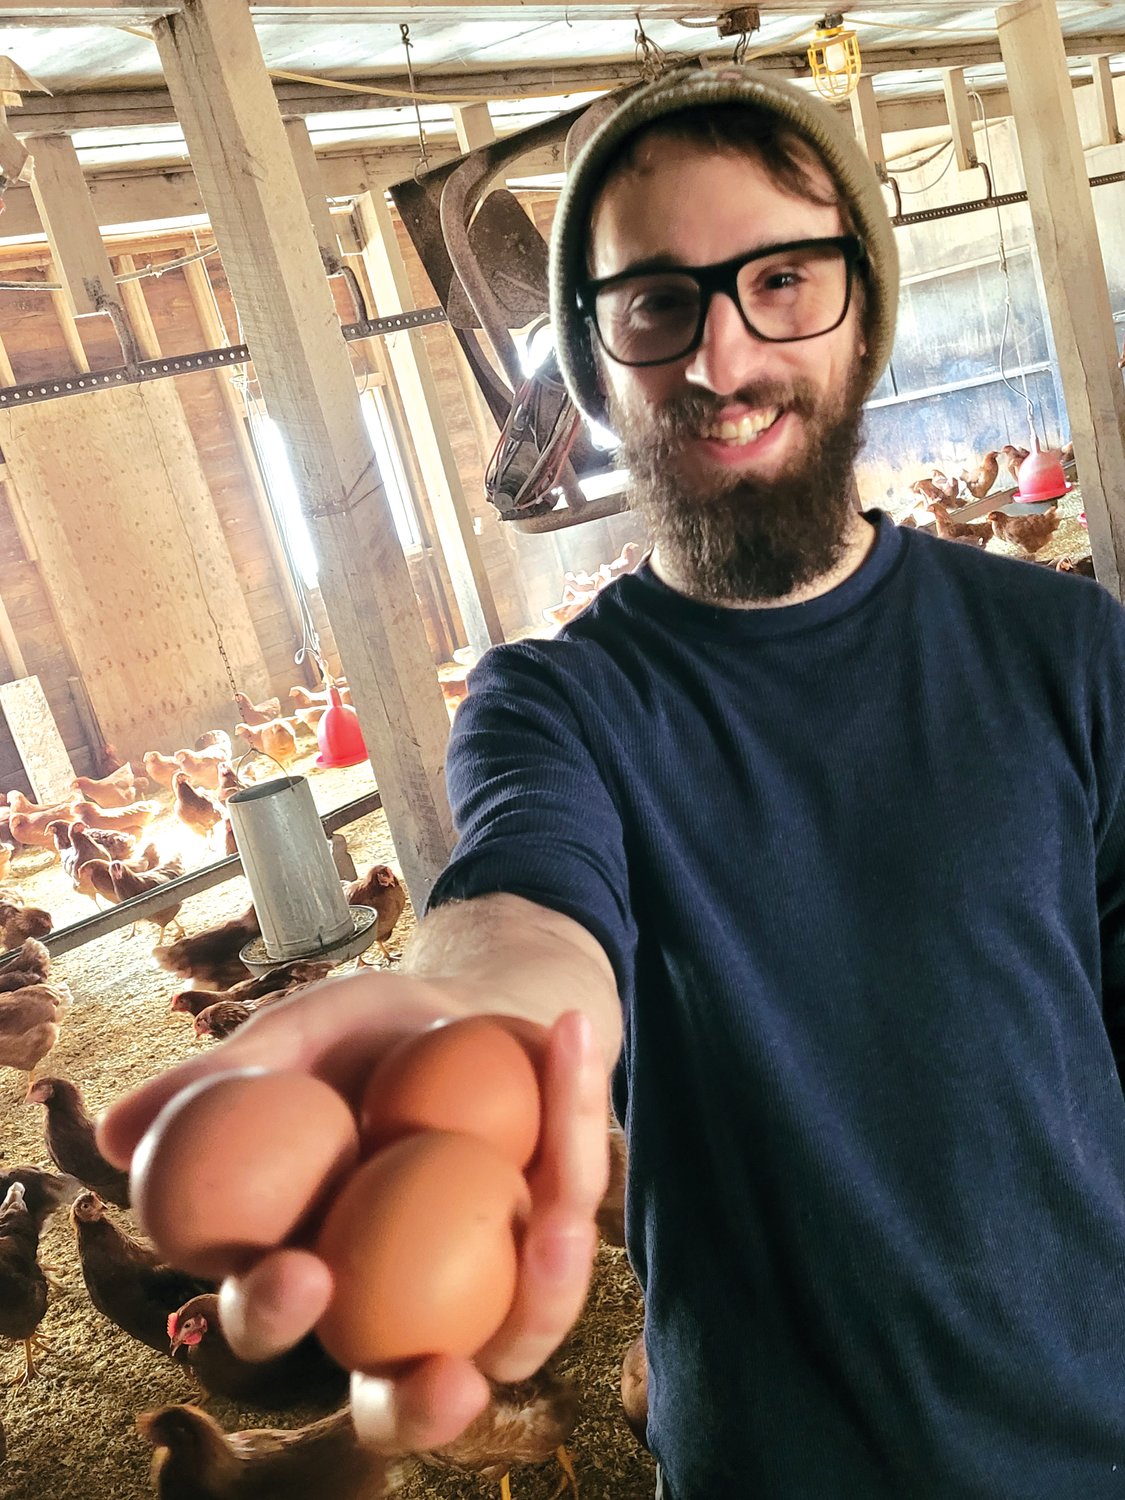 EGGING ON THE COMPETITION: Fourth-generation poultry farmer Adam Baffoni, of Baffoni Poultry Farm in Johnston, holds three fresh eggs laid by a few of his nearly 8,000 egg-laying Rhode Island Red hens.